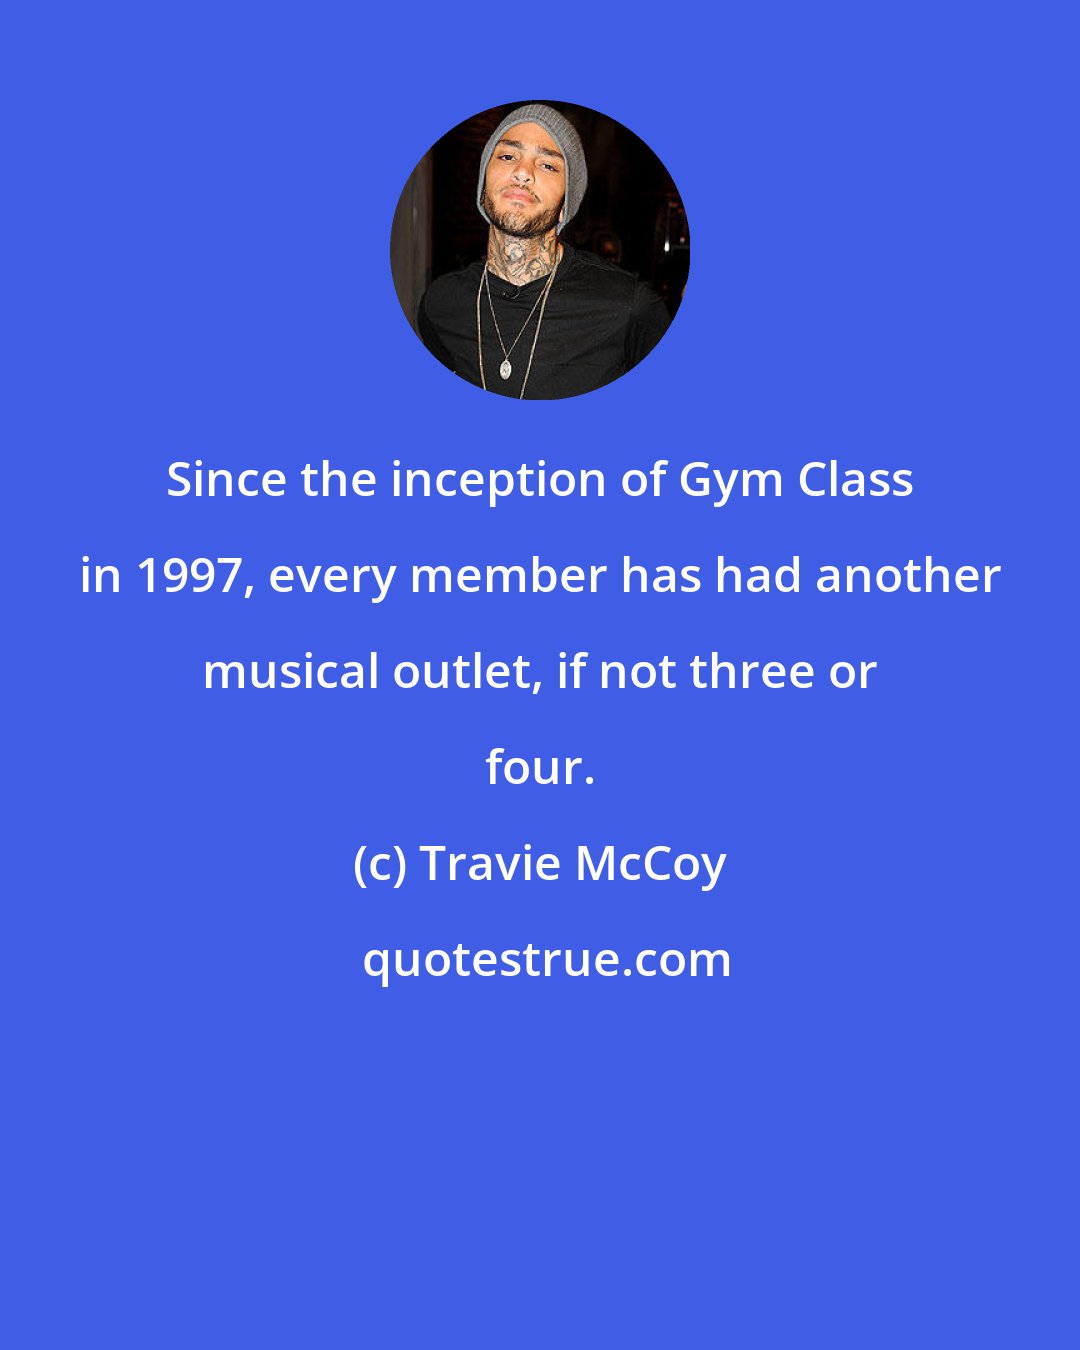 Travie McCoy: Since the inception of Gym Class in 1997, every member has had another musical outlet, if not three or four.